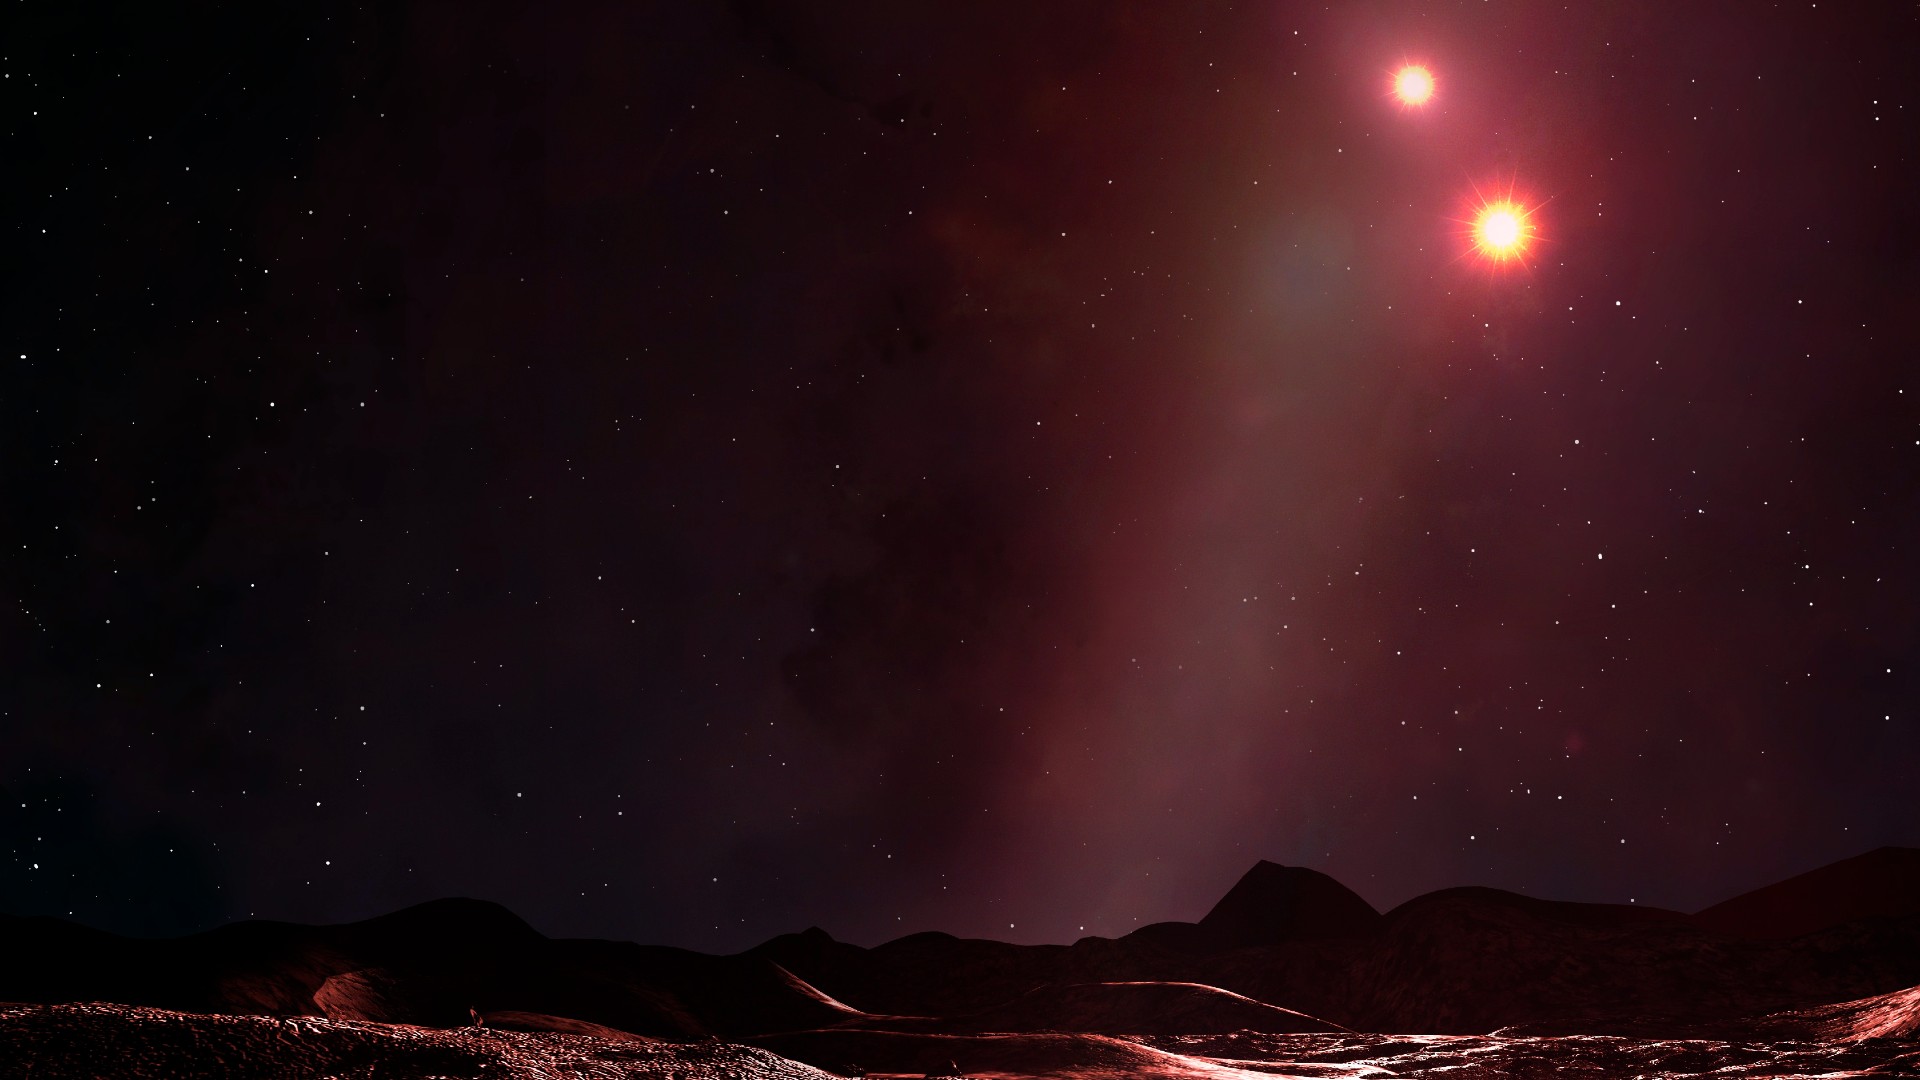 two suns in the night sky over a rocky planet